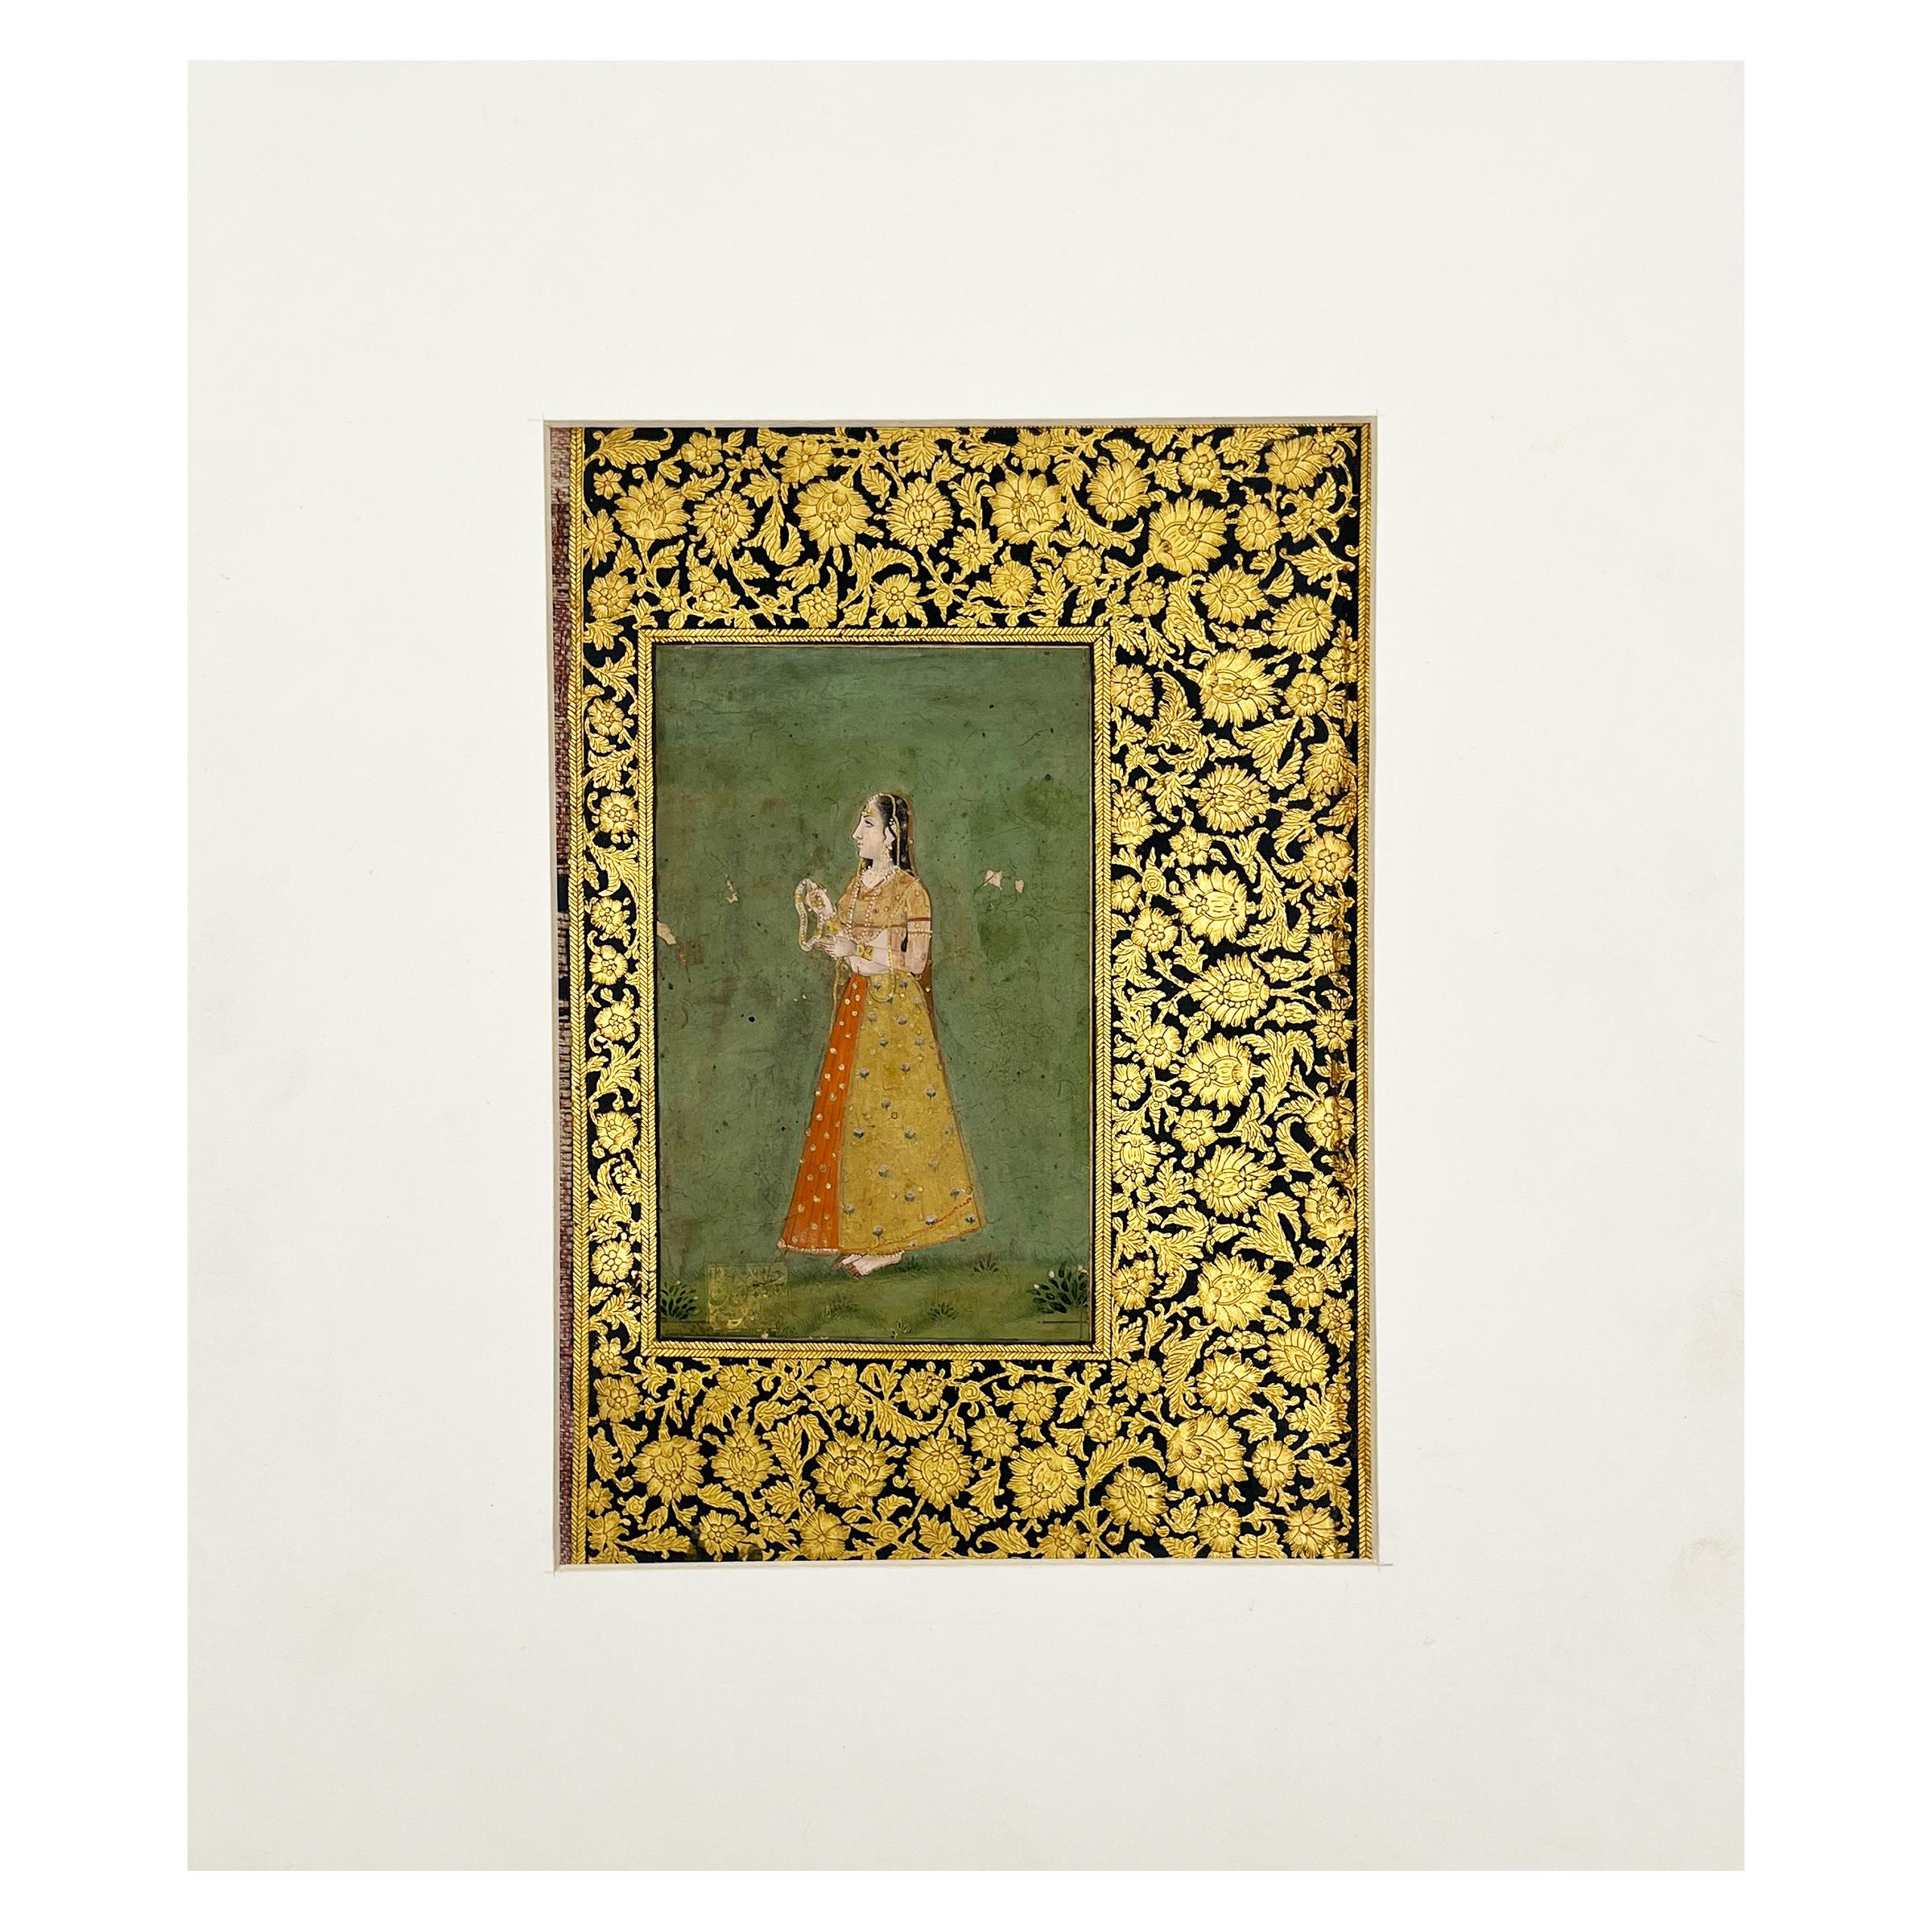 These Indian miniature paintings showcases an elegantly dressed Indian man and a lady, the lady elegantly dressed in a traditional sari and adorned with intricate jewellery, the man wearing traditional clothes and a head turban. The man is holding a